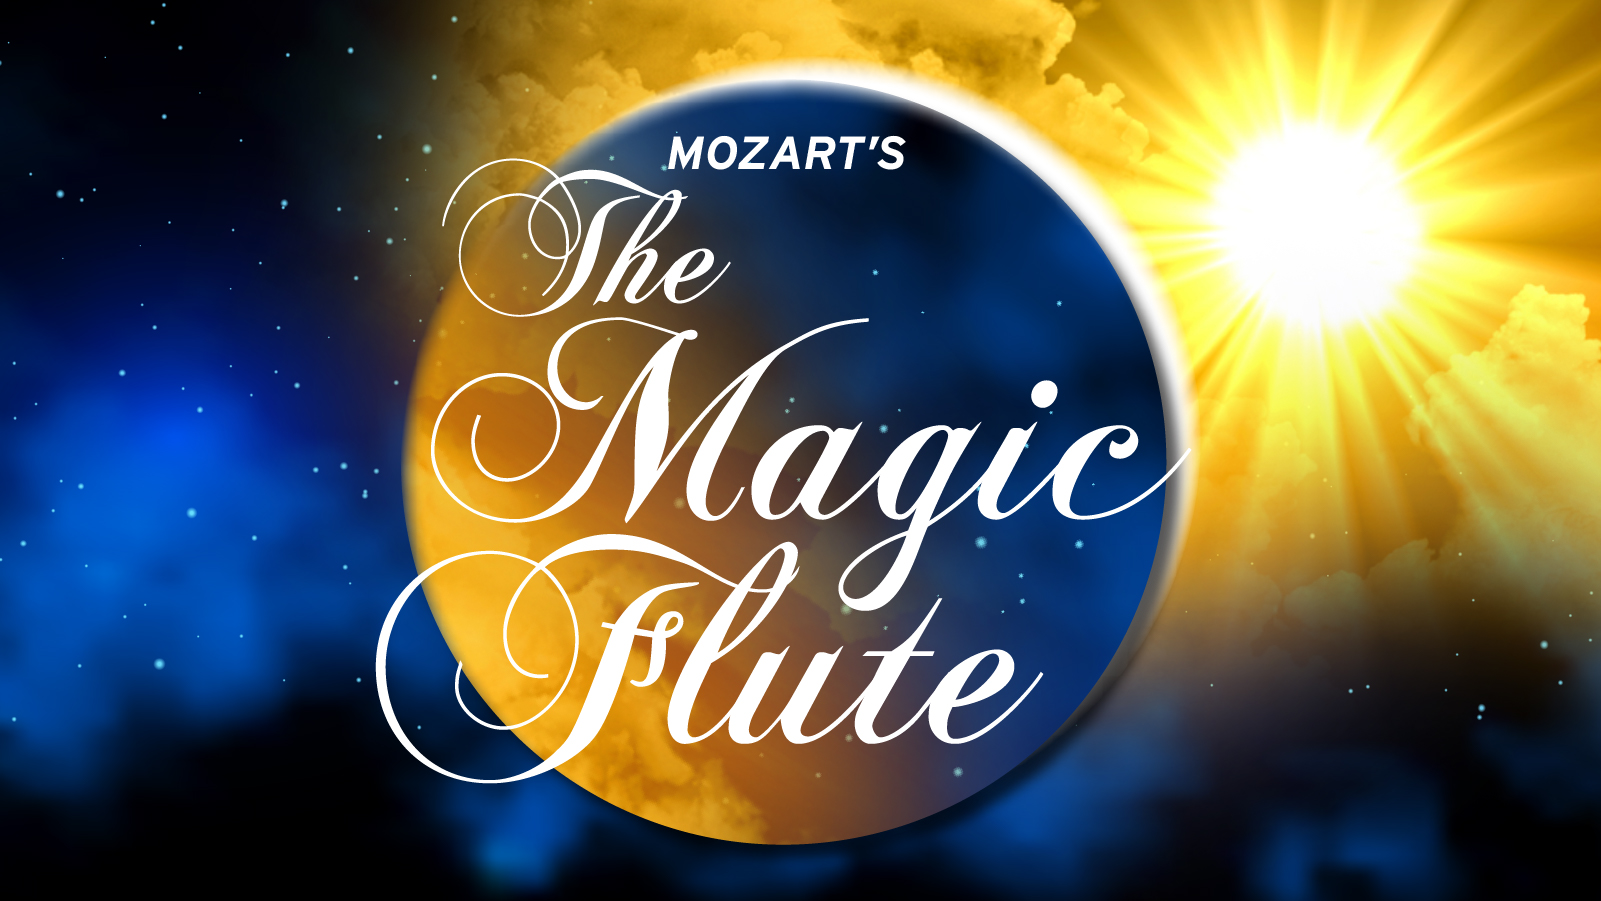  Graphic art depicting a solar eclipse with the text "The Magic Flute."